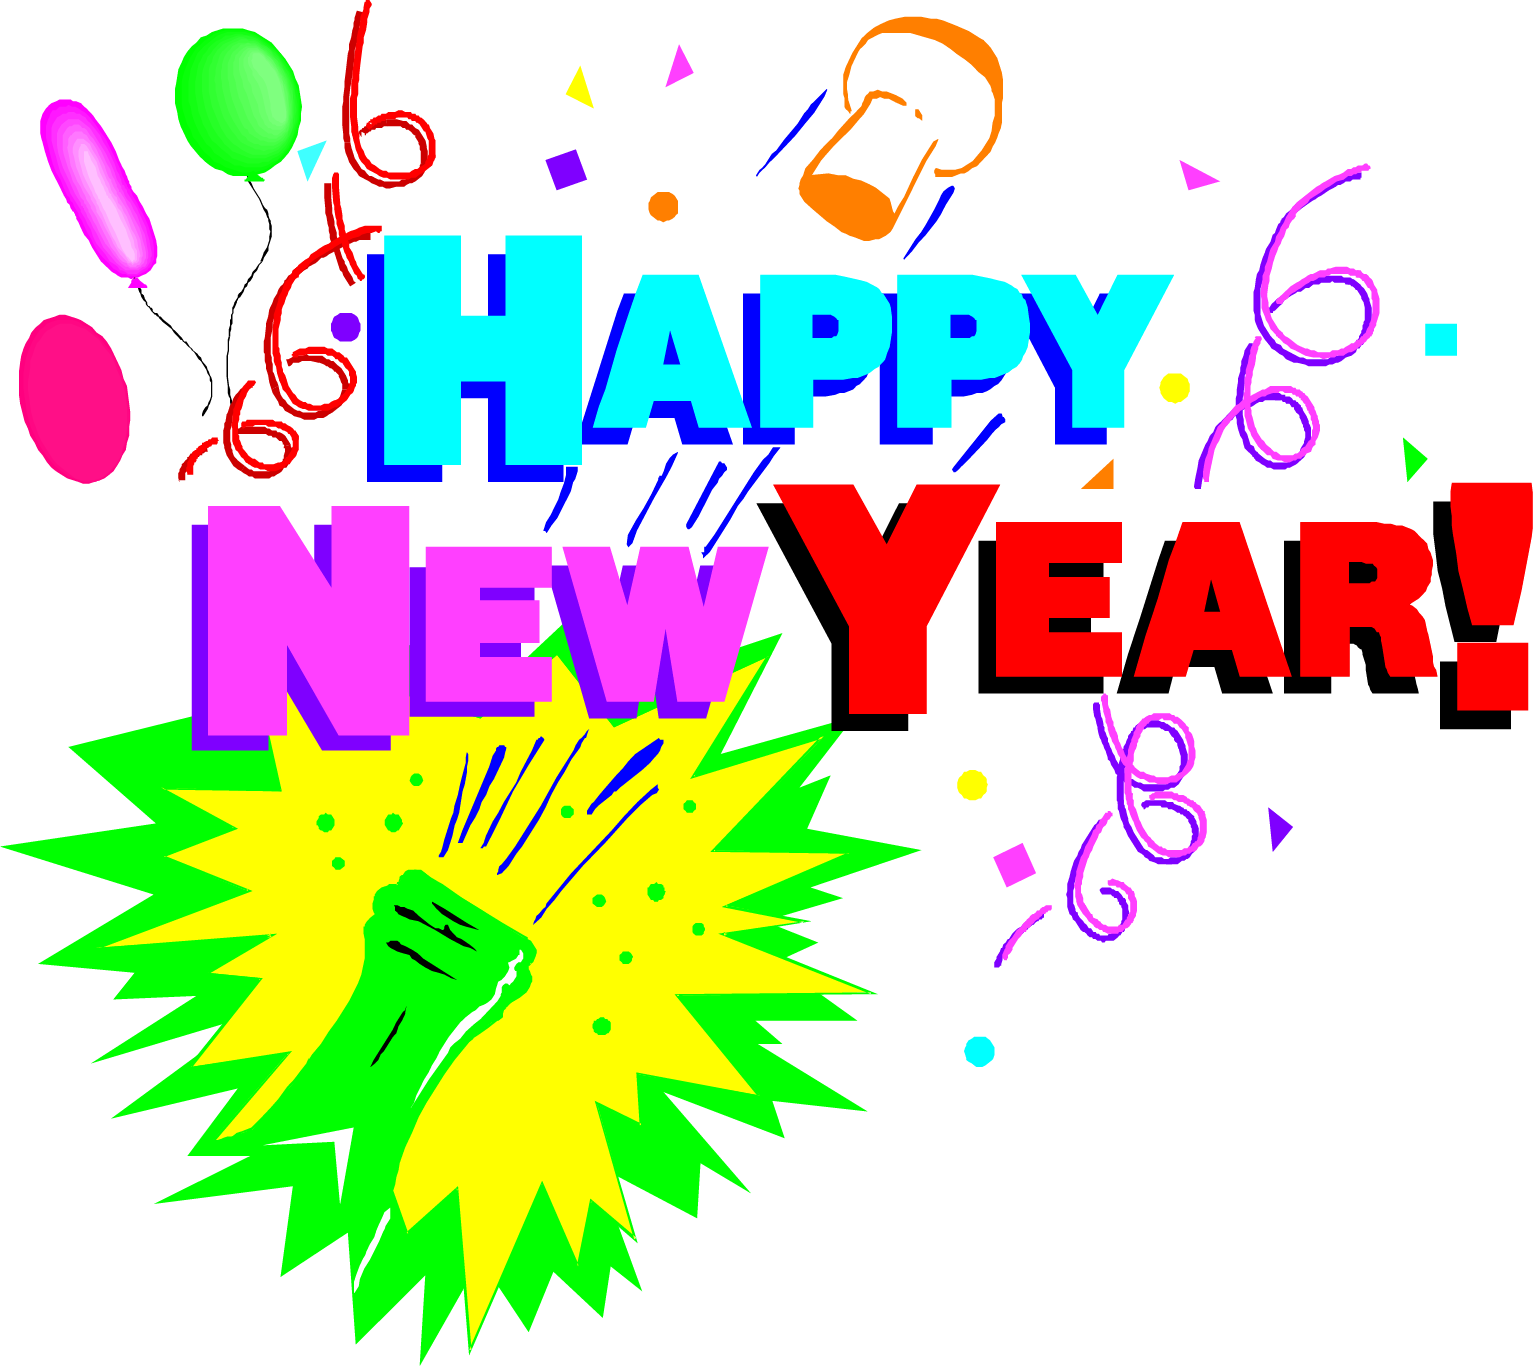 New Year's Eve Party Clip Art - New Year's Eve Party Clip Art (1533x1366)